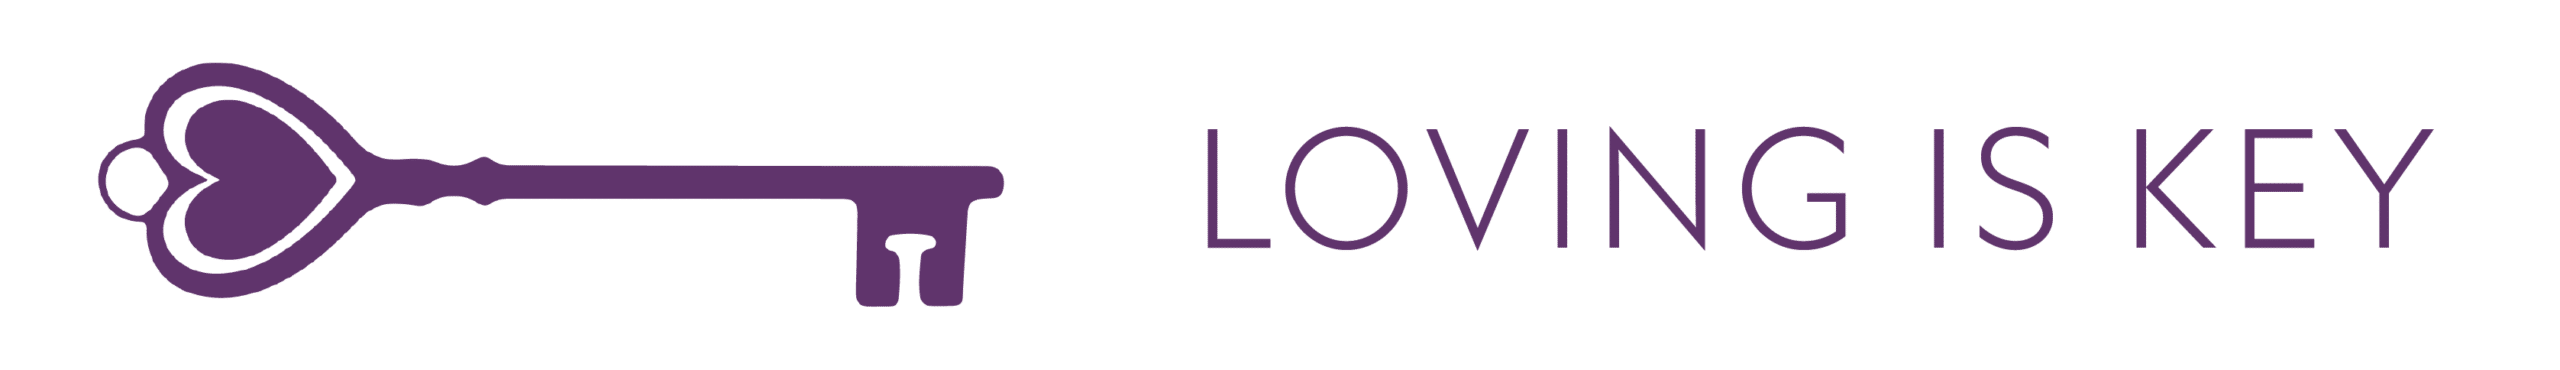 Loving Is Key Logo with Words